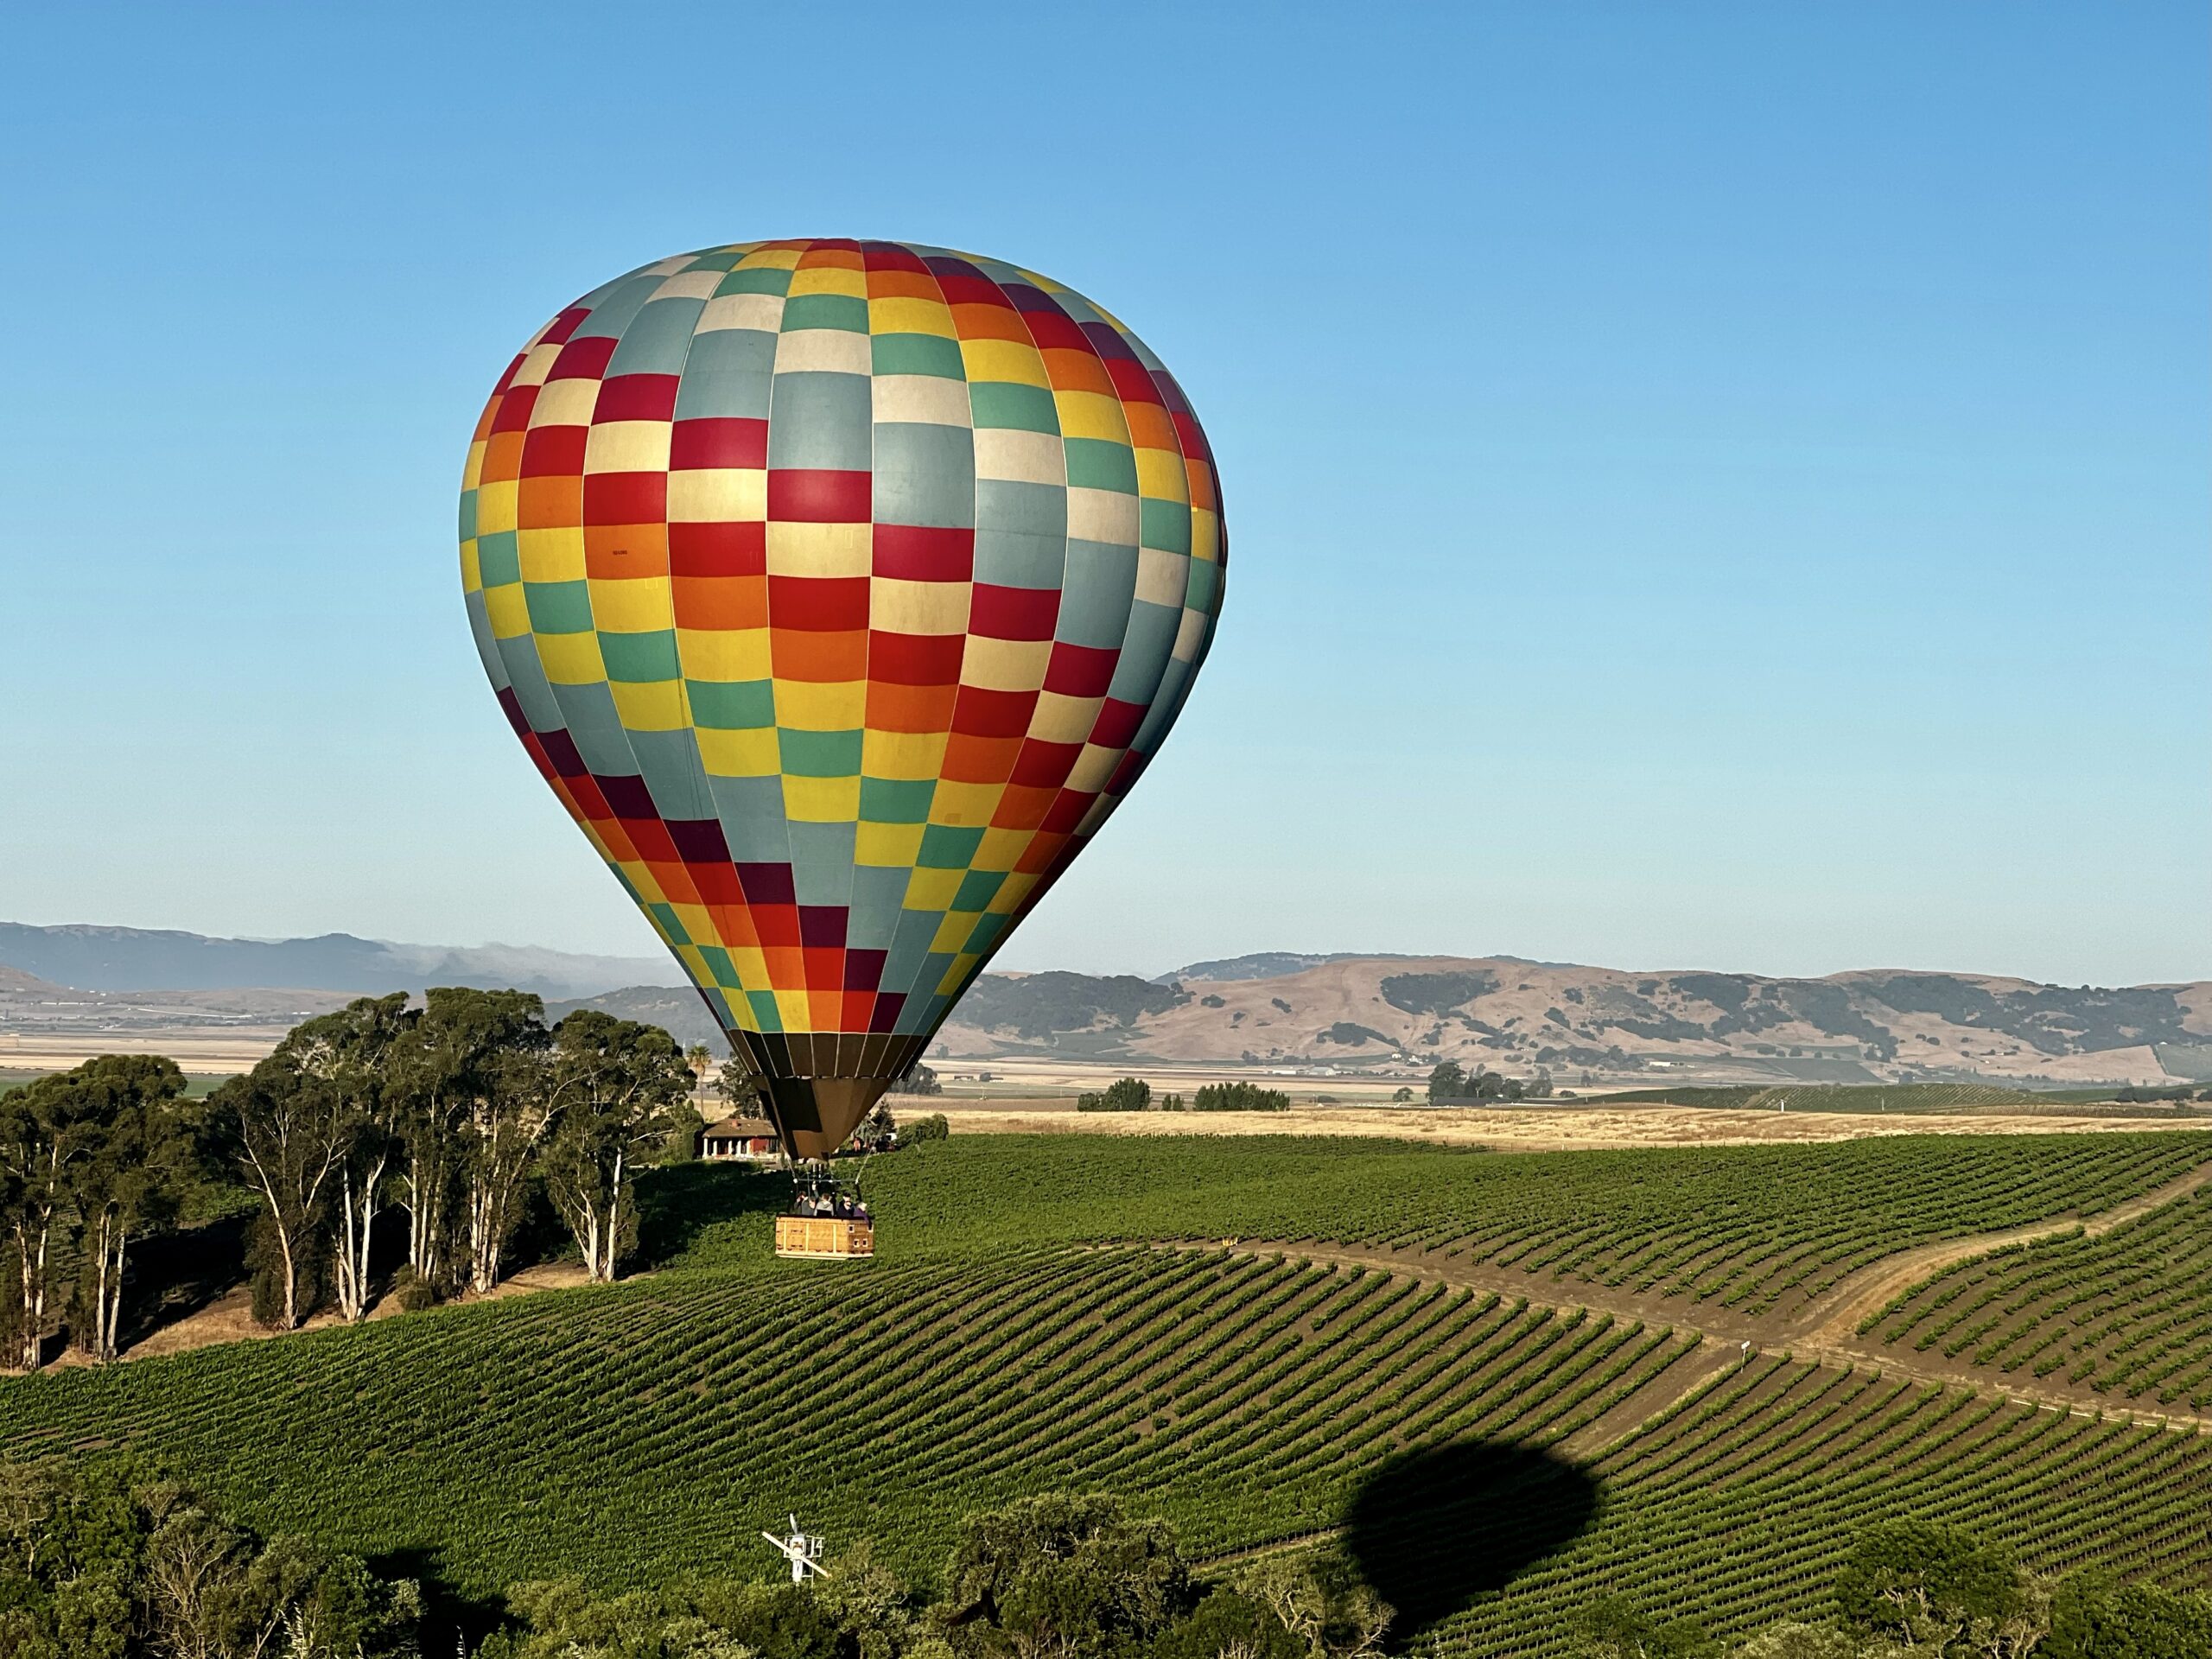 Colorful hot air balloon floating in the skies over vineyards.